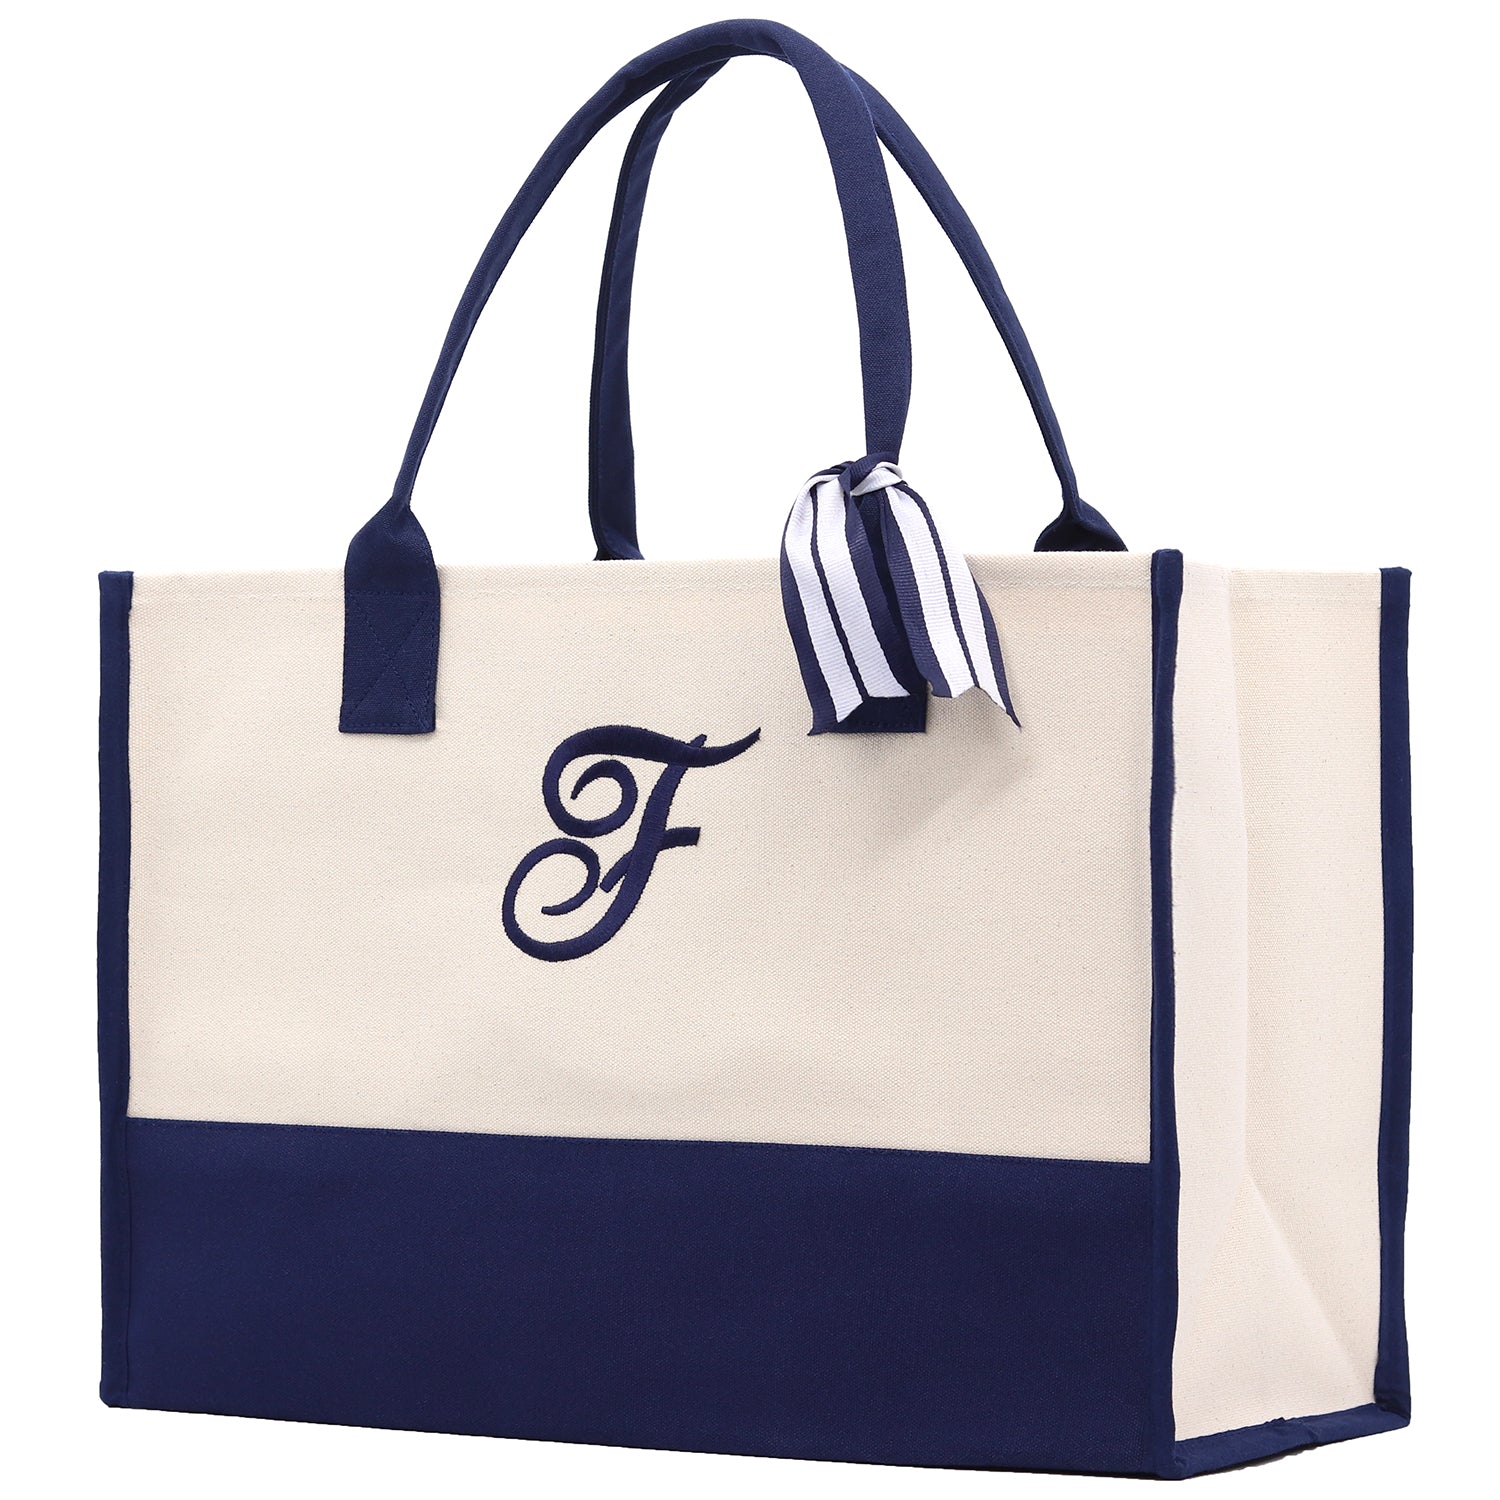 Monogram Tote Bag with 100% Cotton Canvas and a Chic Personalized Monogram Navy Blue Vanessa Rosella Script F 